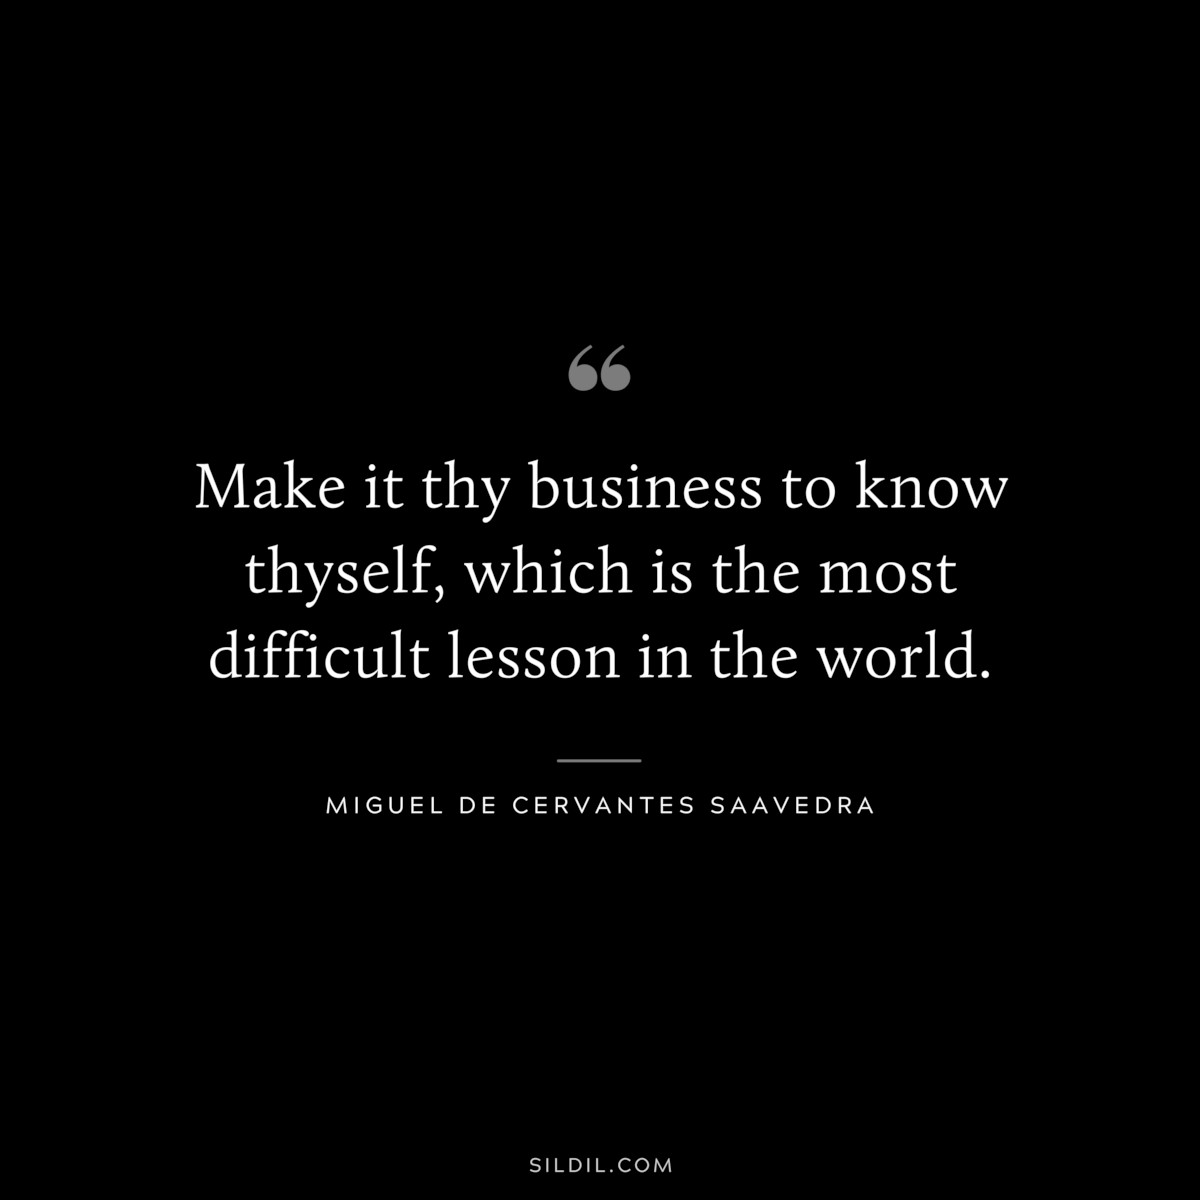 Make it thy business to know thyself, which is the most difficult lesson in the world. ― Miguel de Cervantes Saavedra